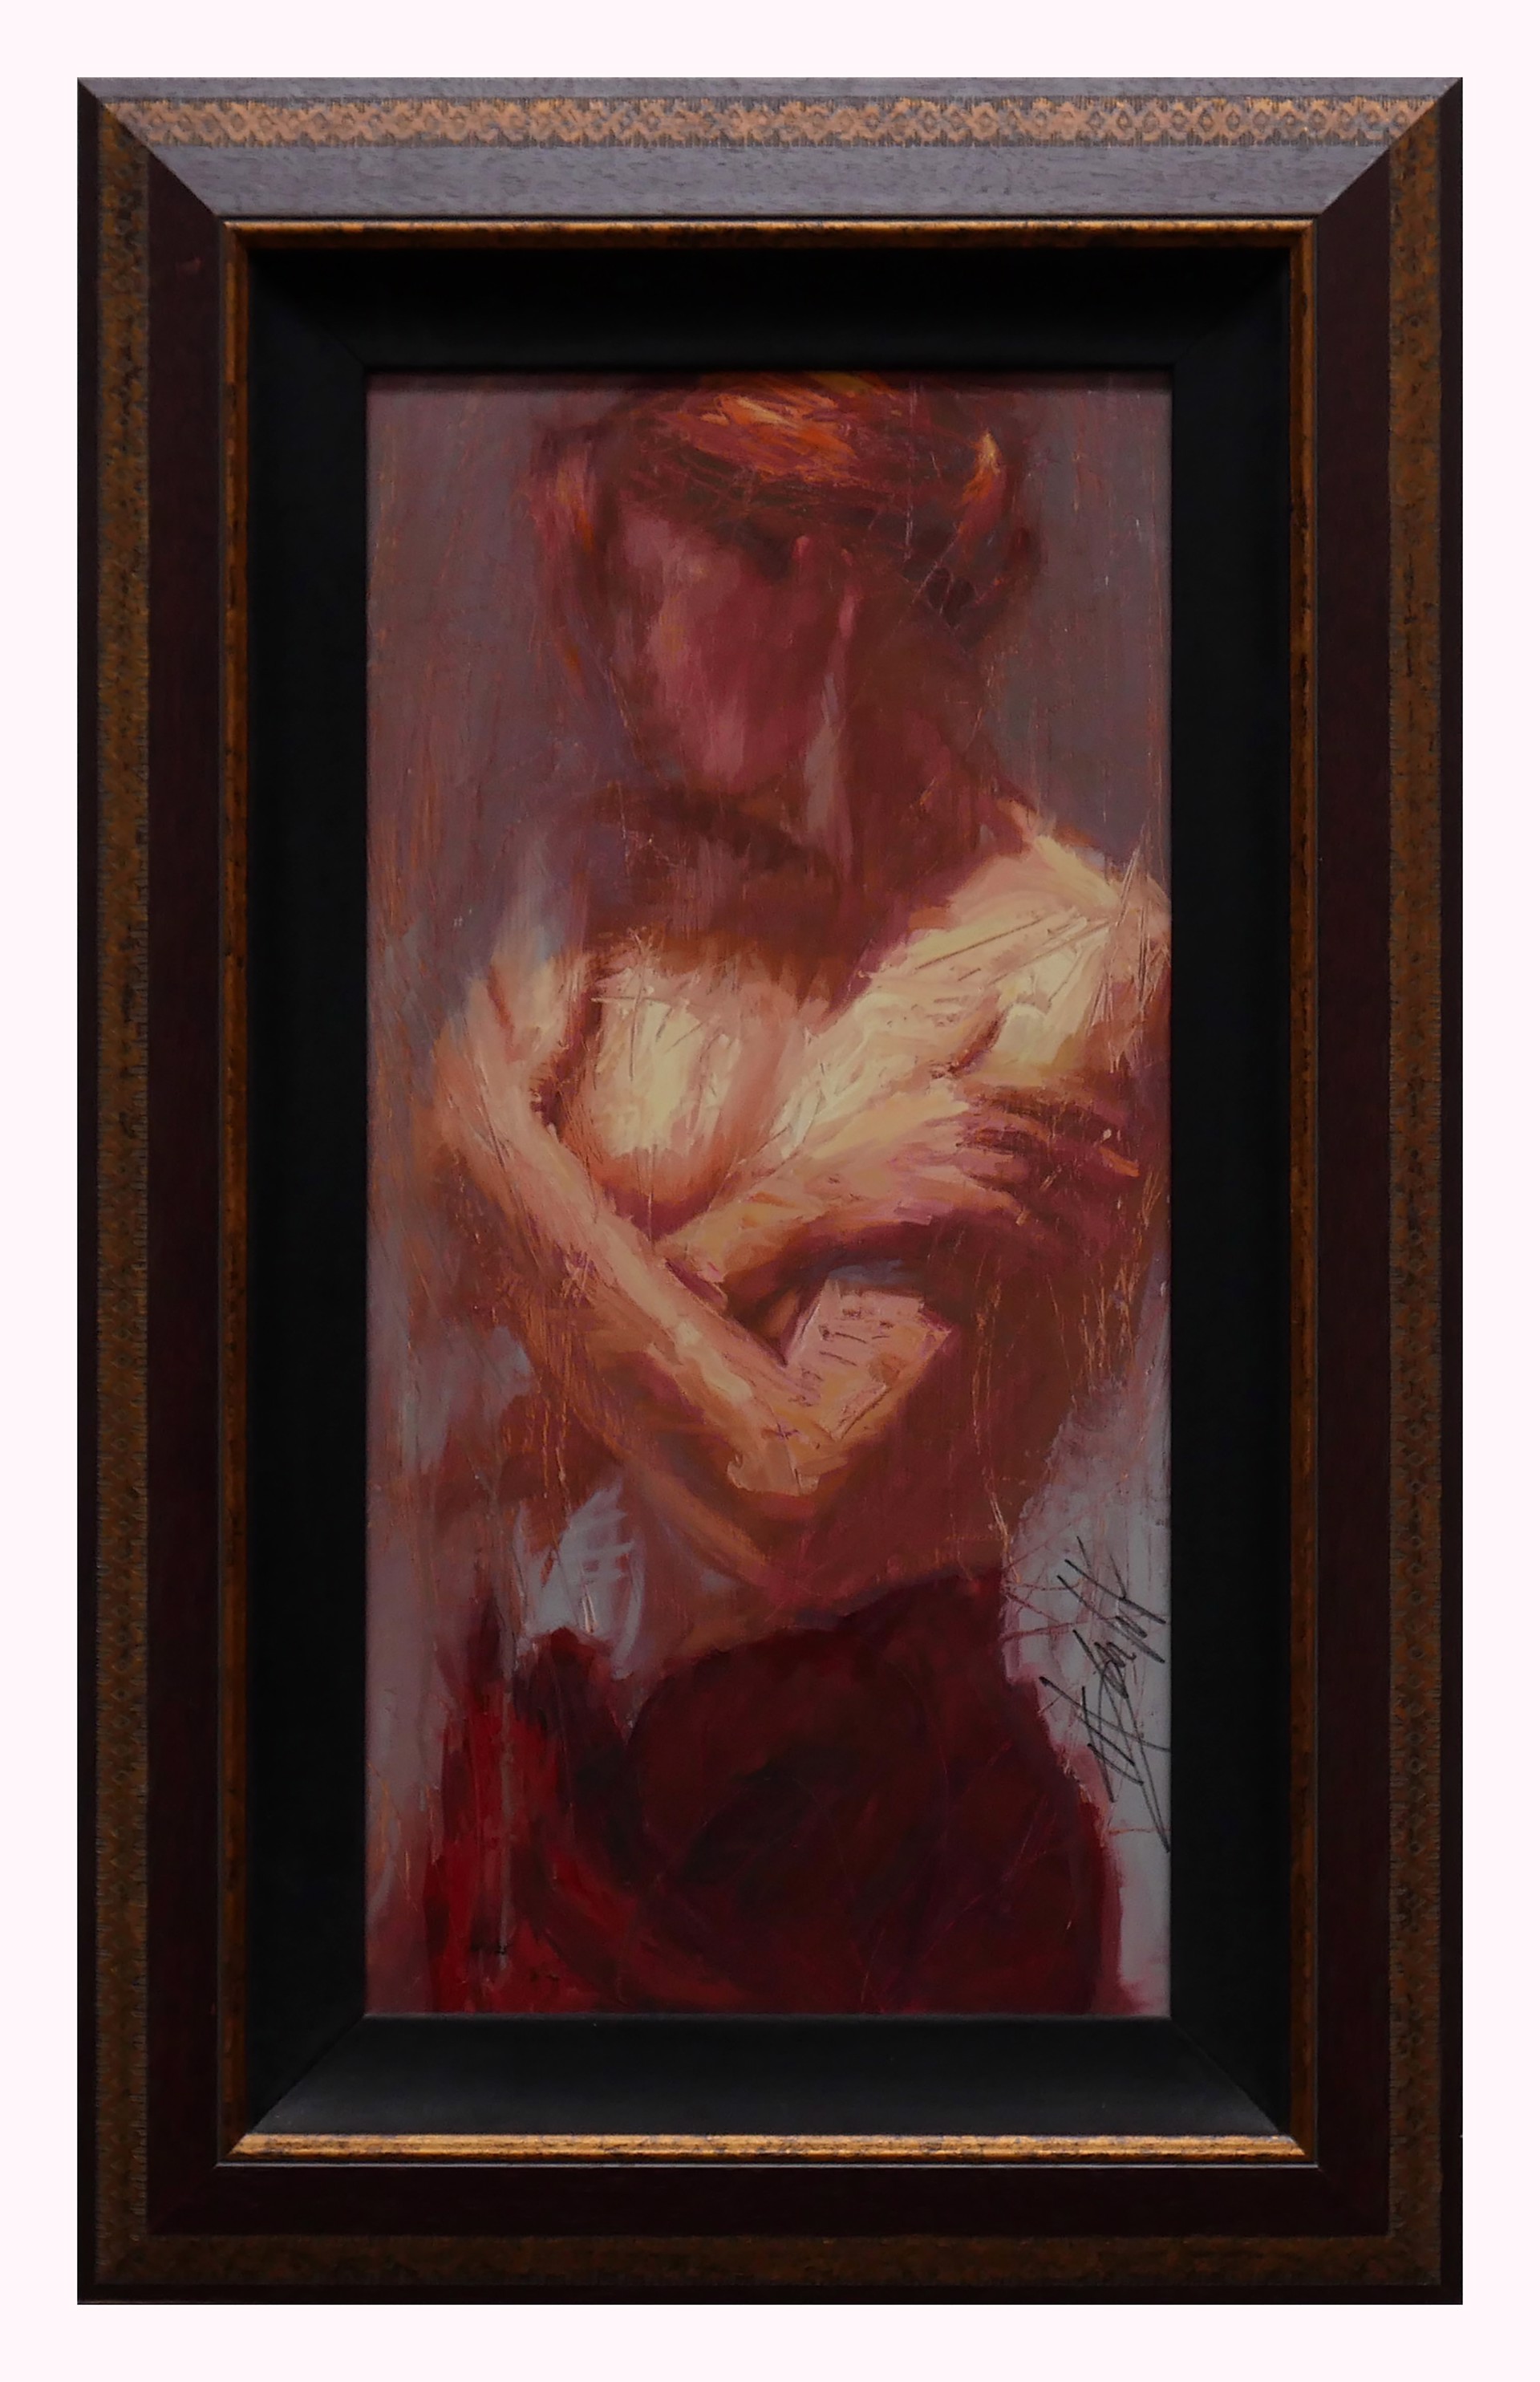 Embrace - With Existing Frame by Henry Asencio